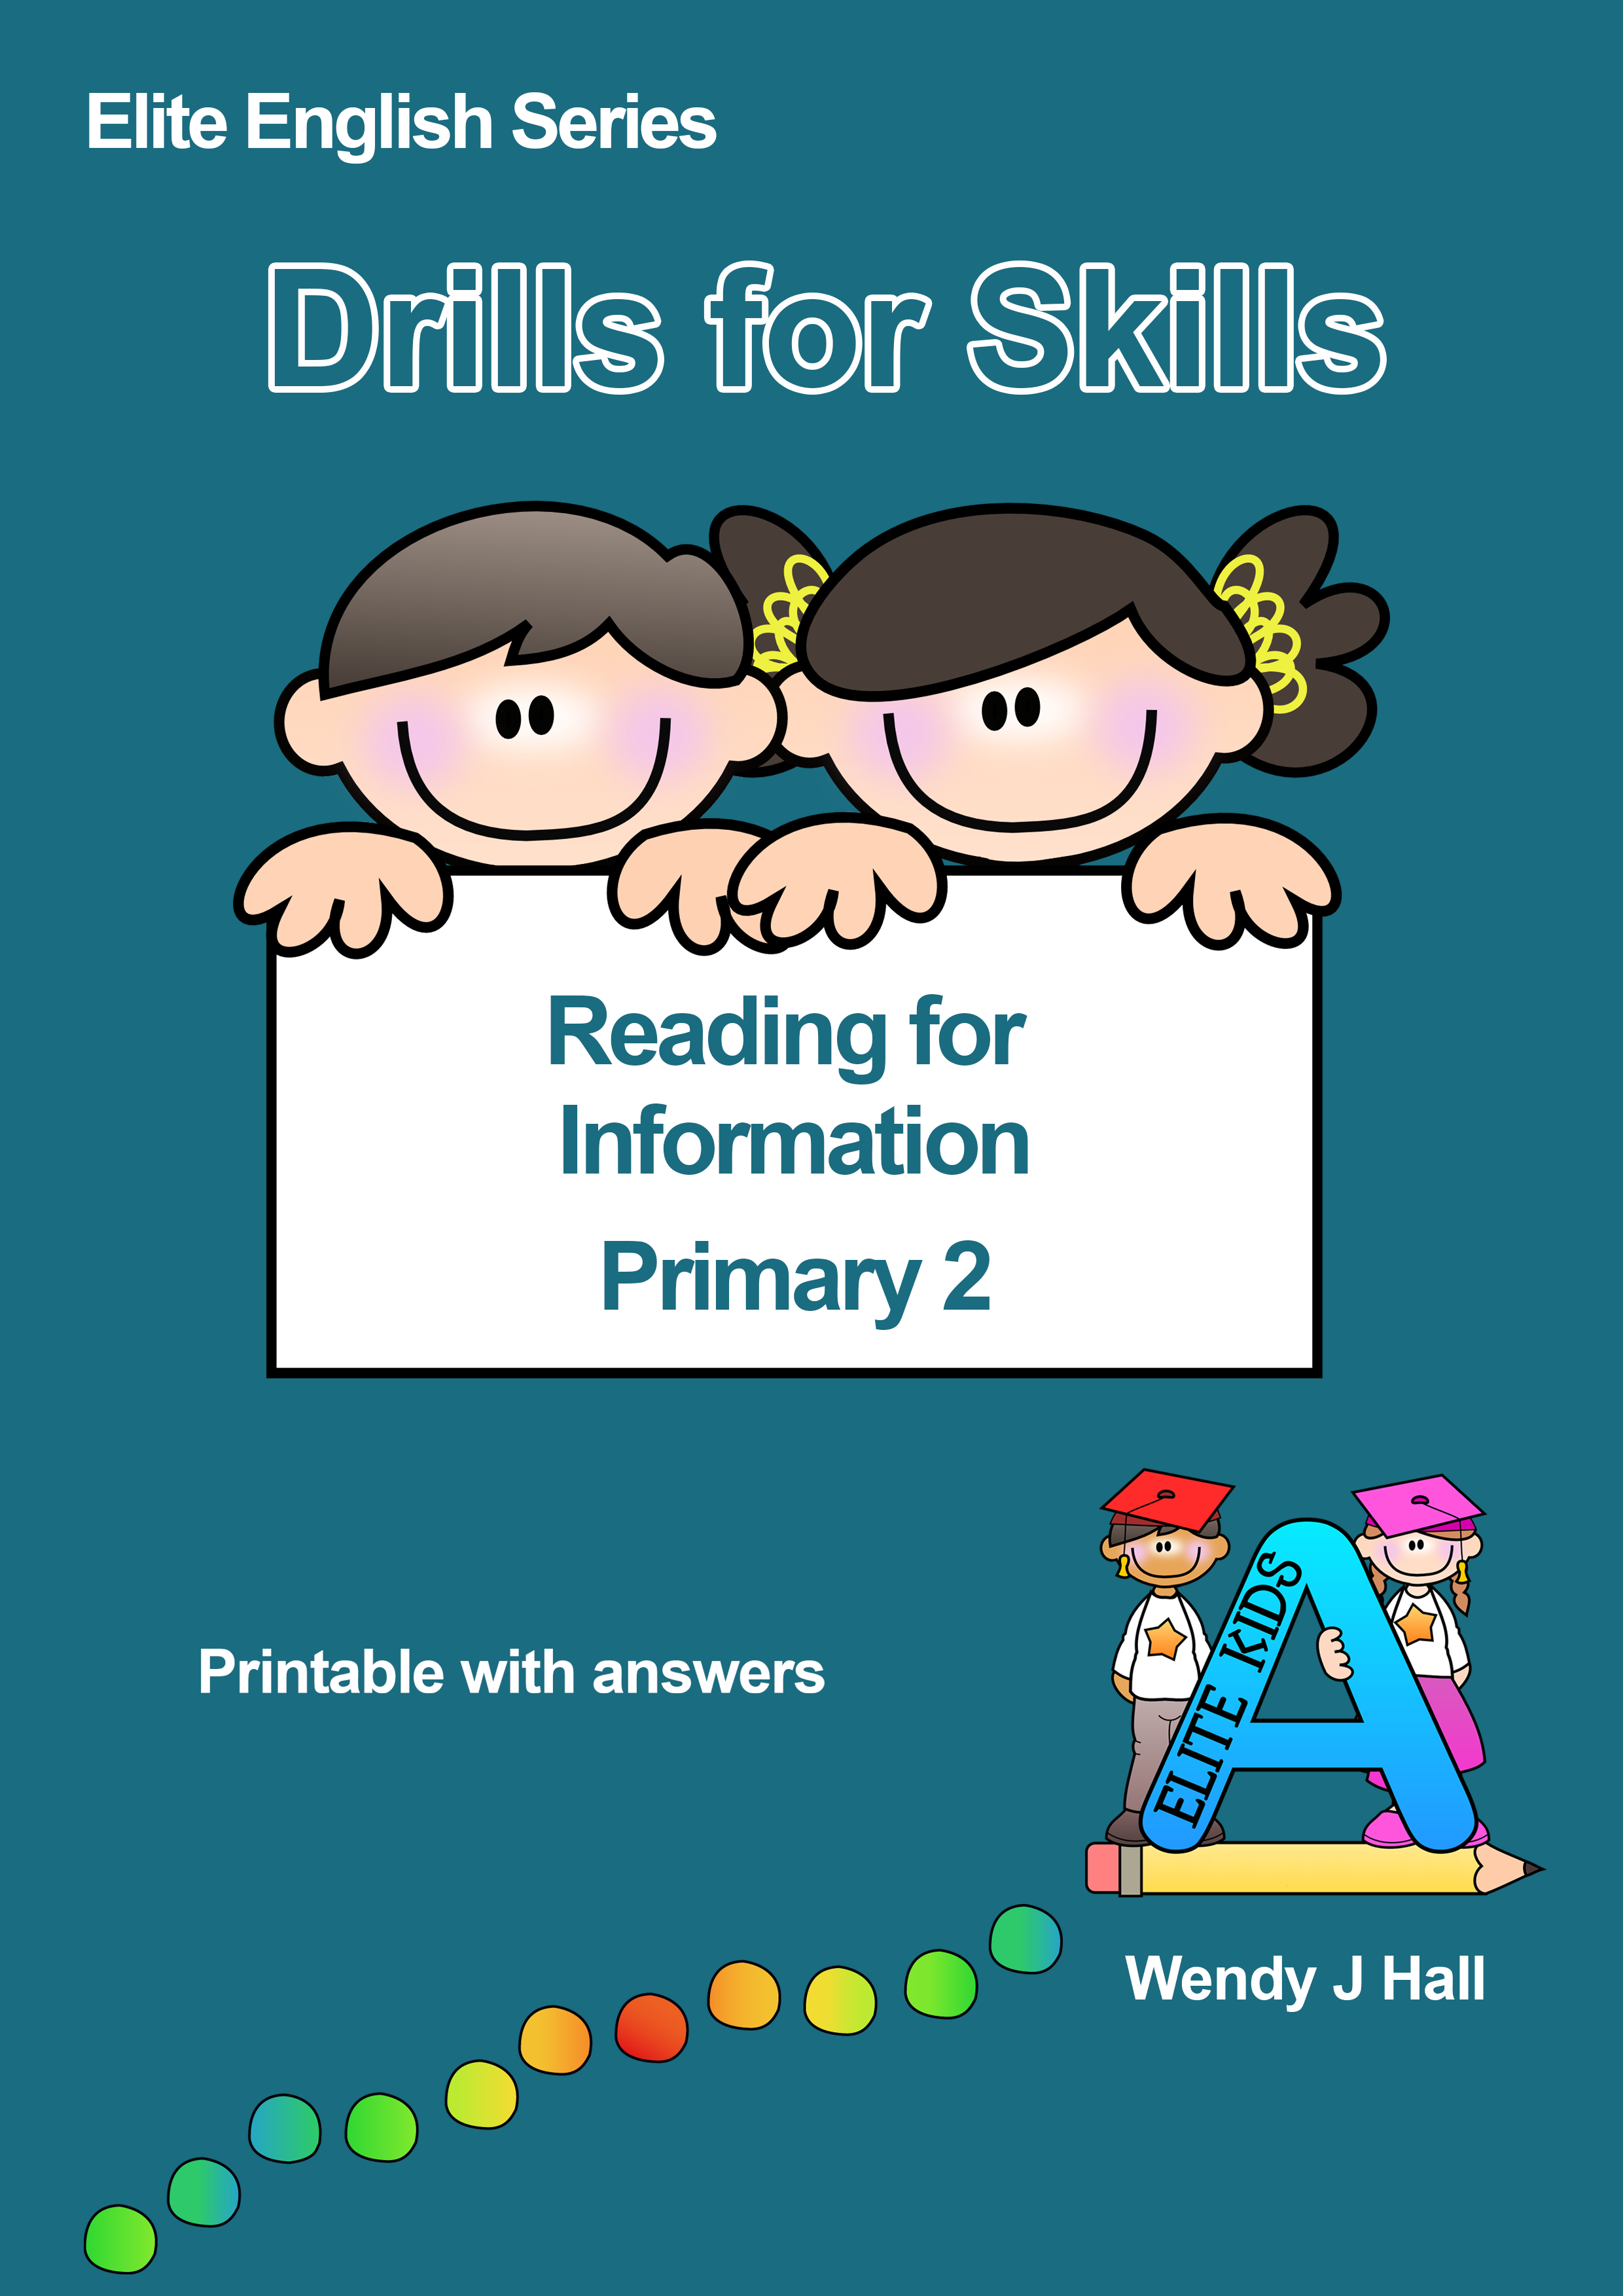 Drills for Skills - Reading for Information | Primary 2